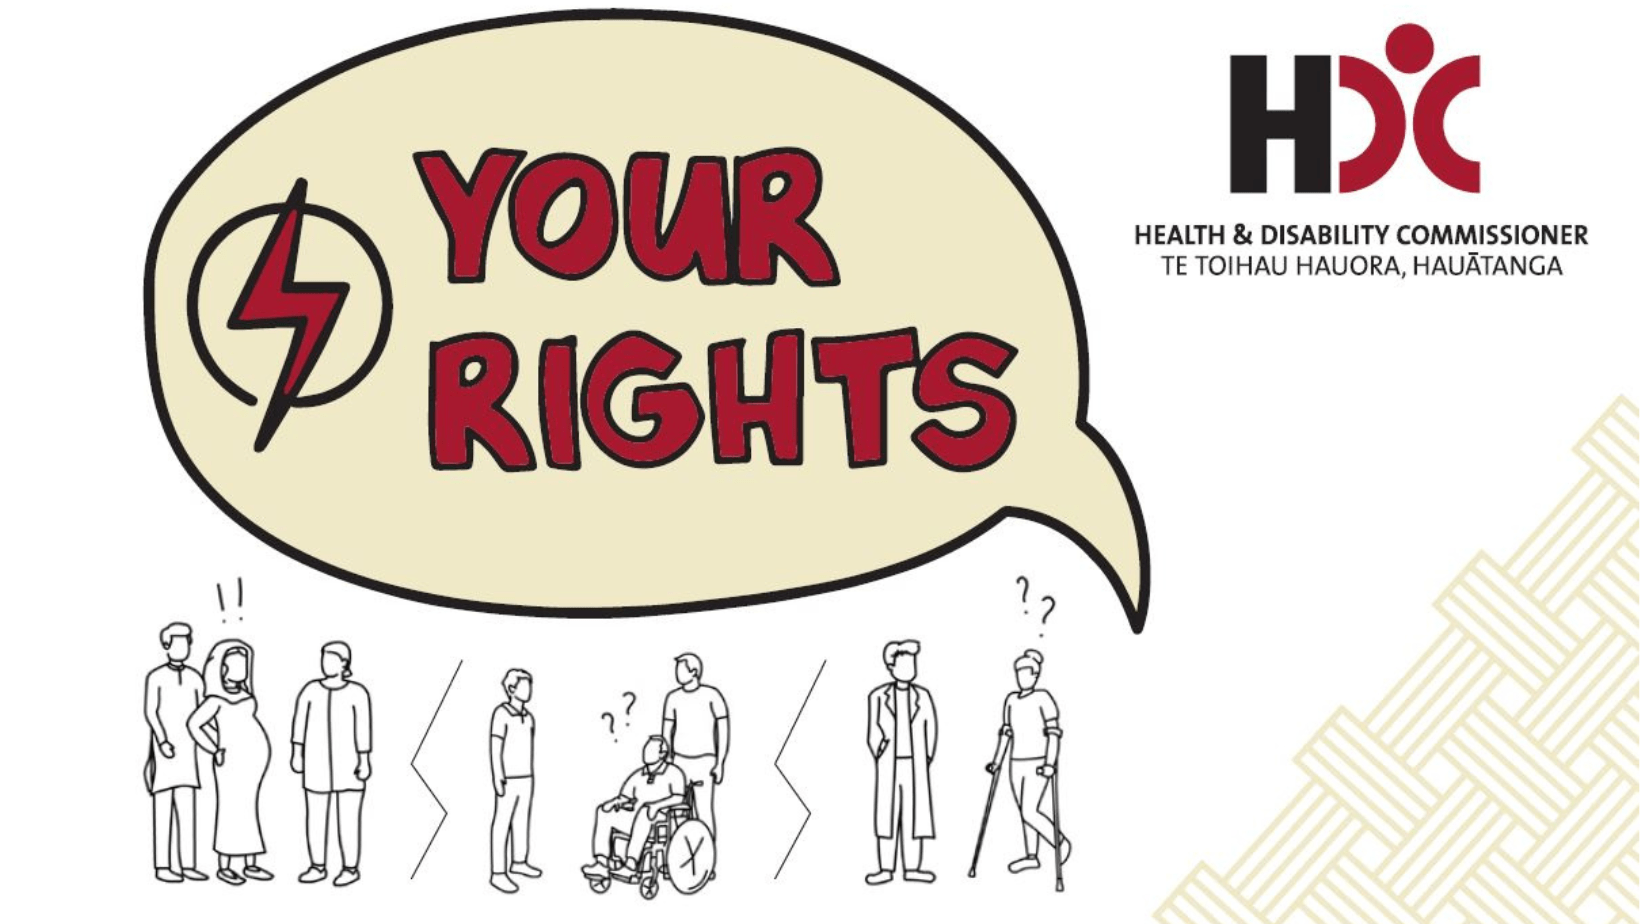 Your Rights - Health, Disability Commissioner